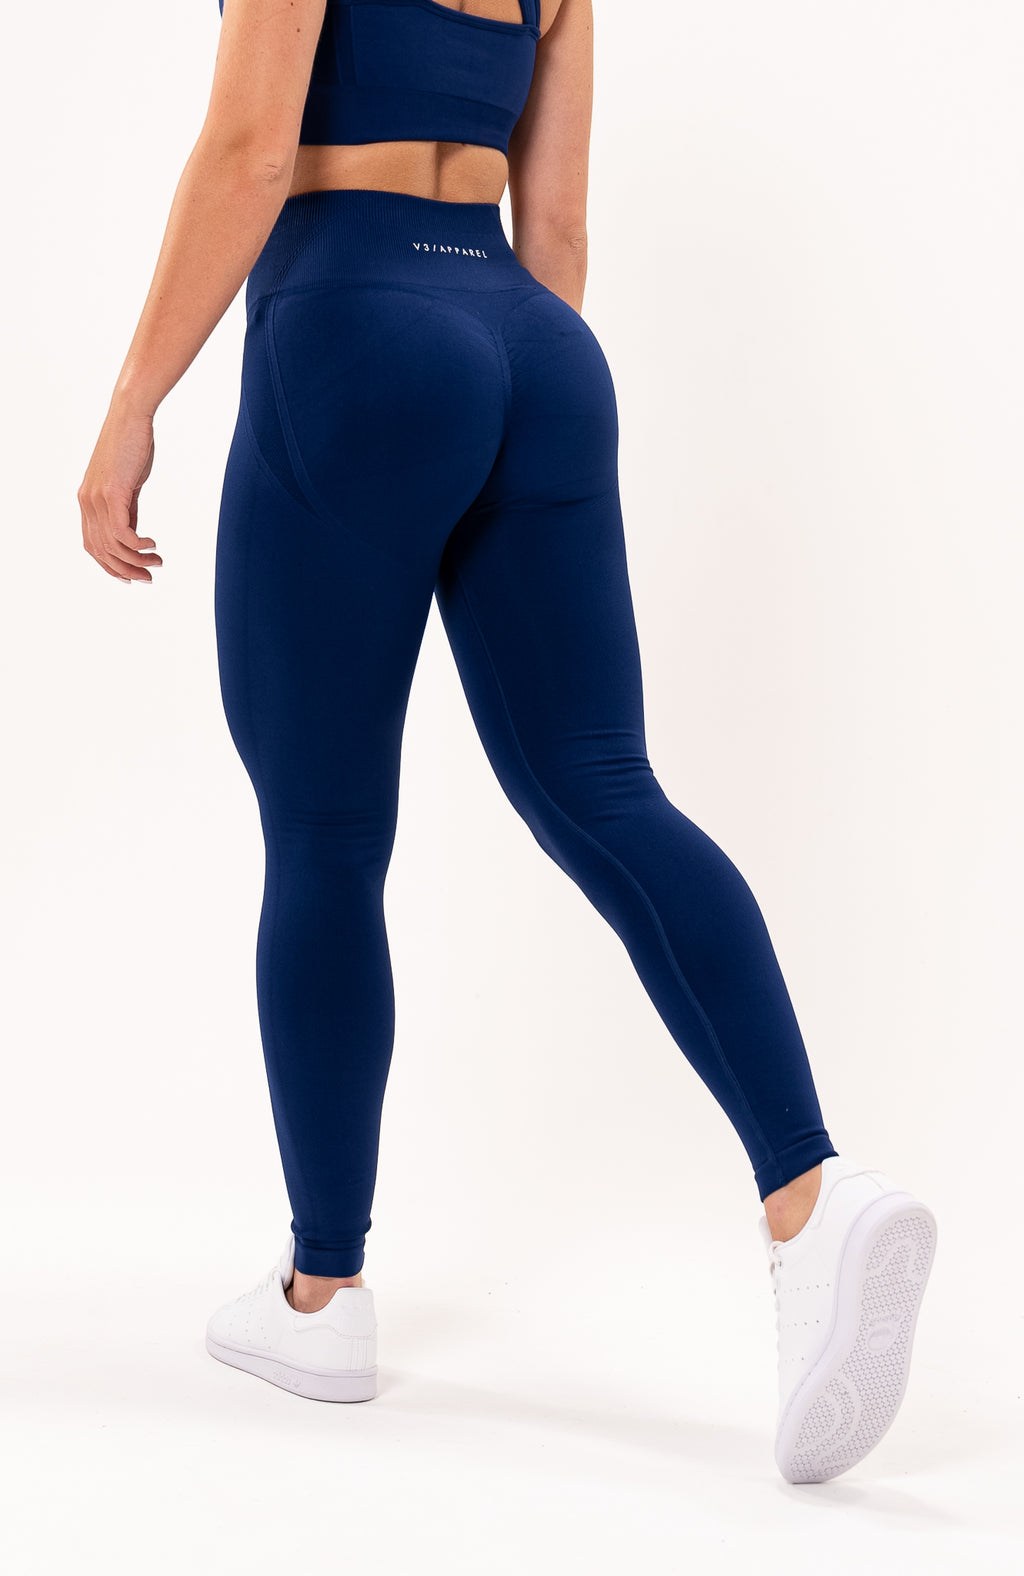 Women's Sports Leggings for active fitness Workouts | Girlsgotstyle UK